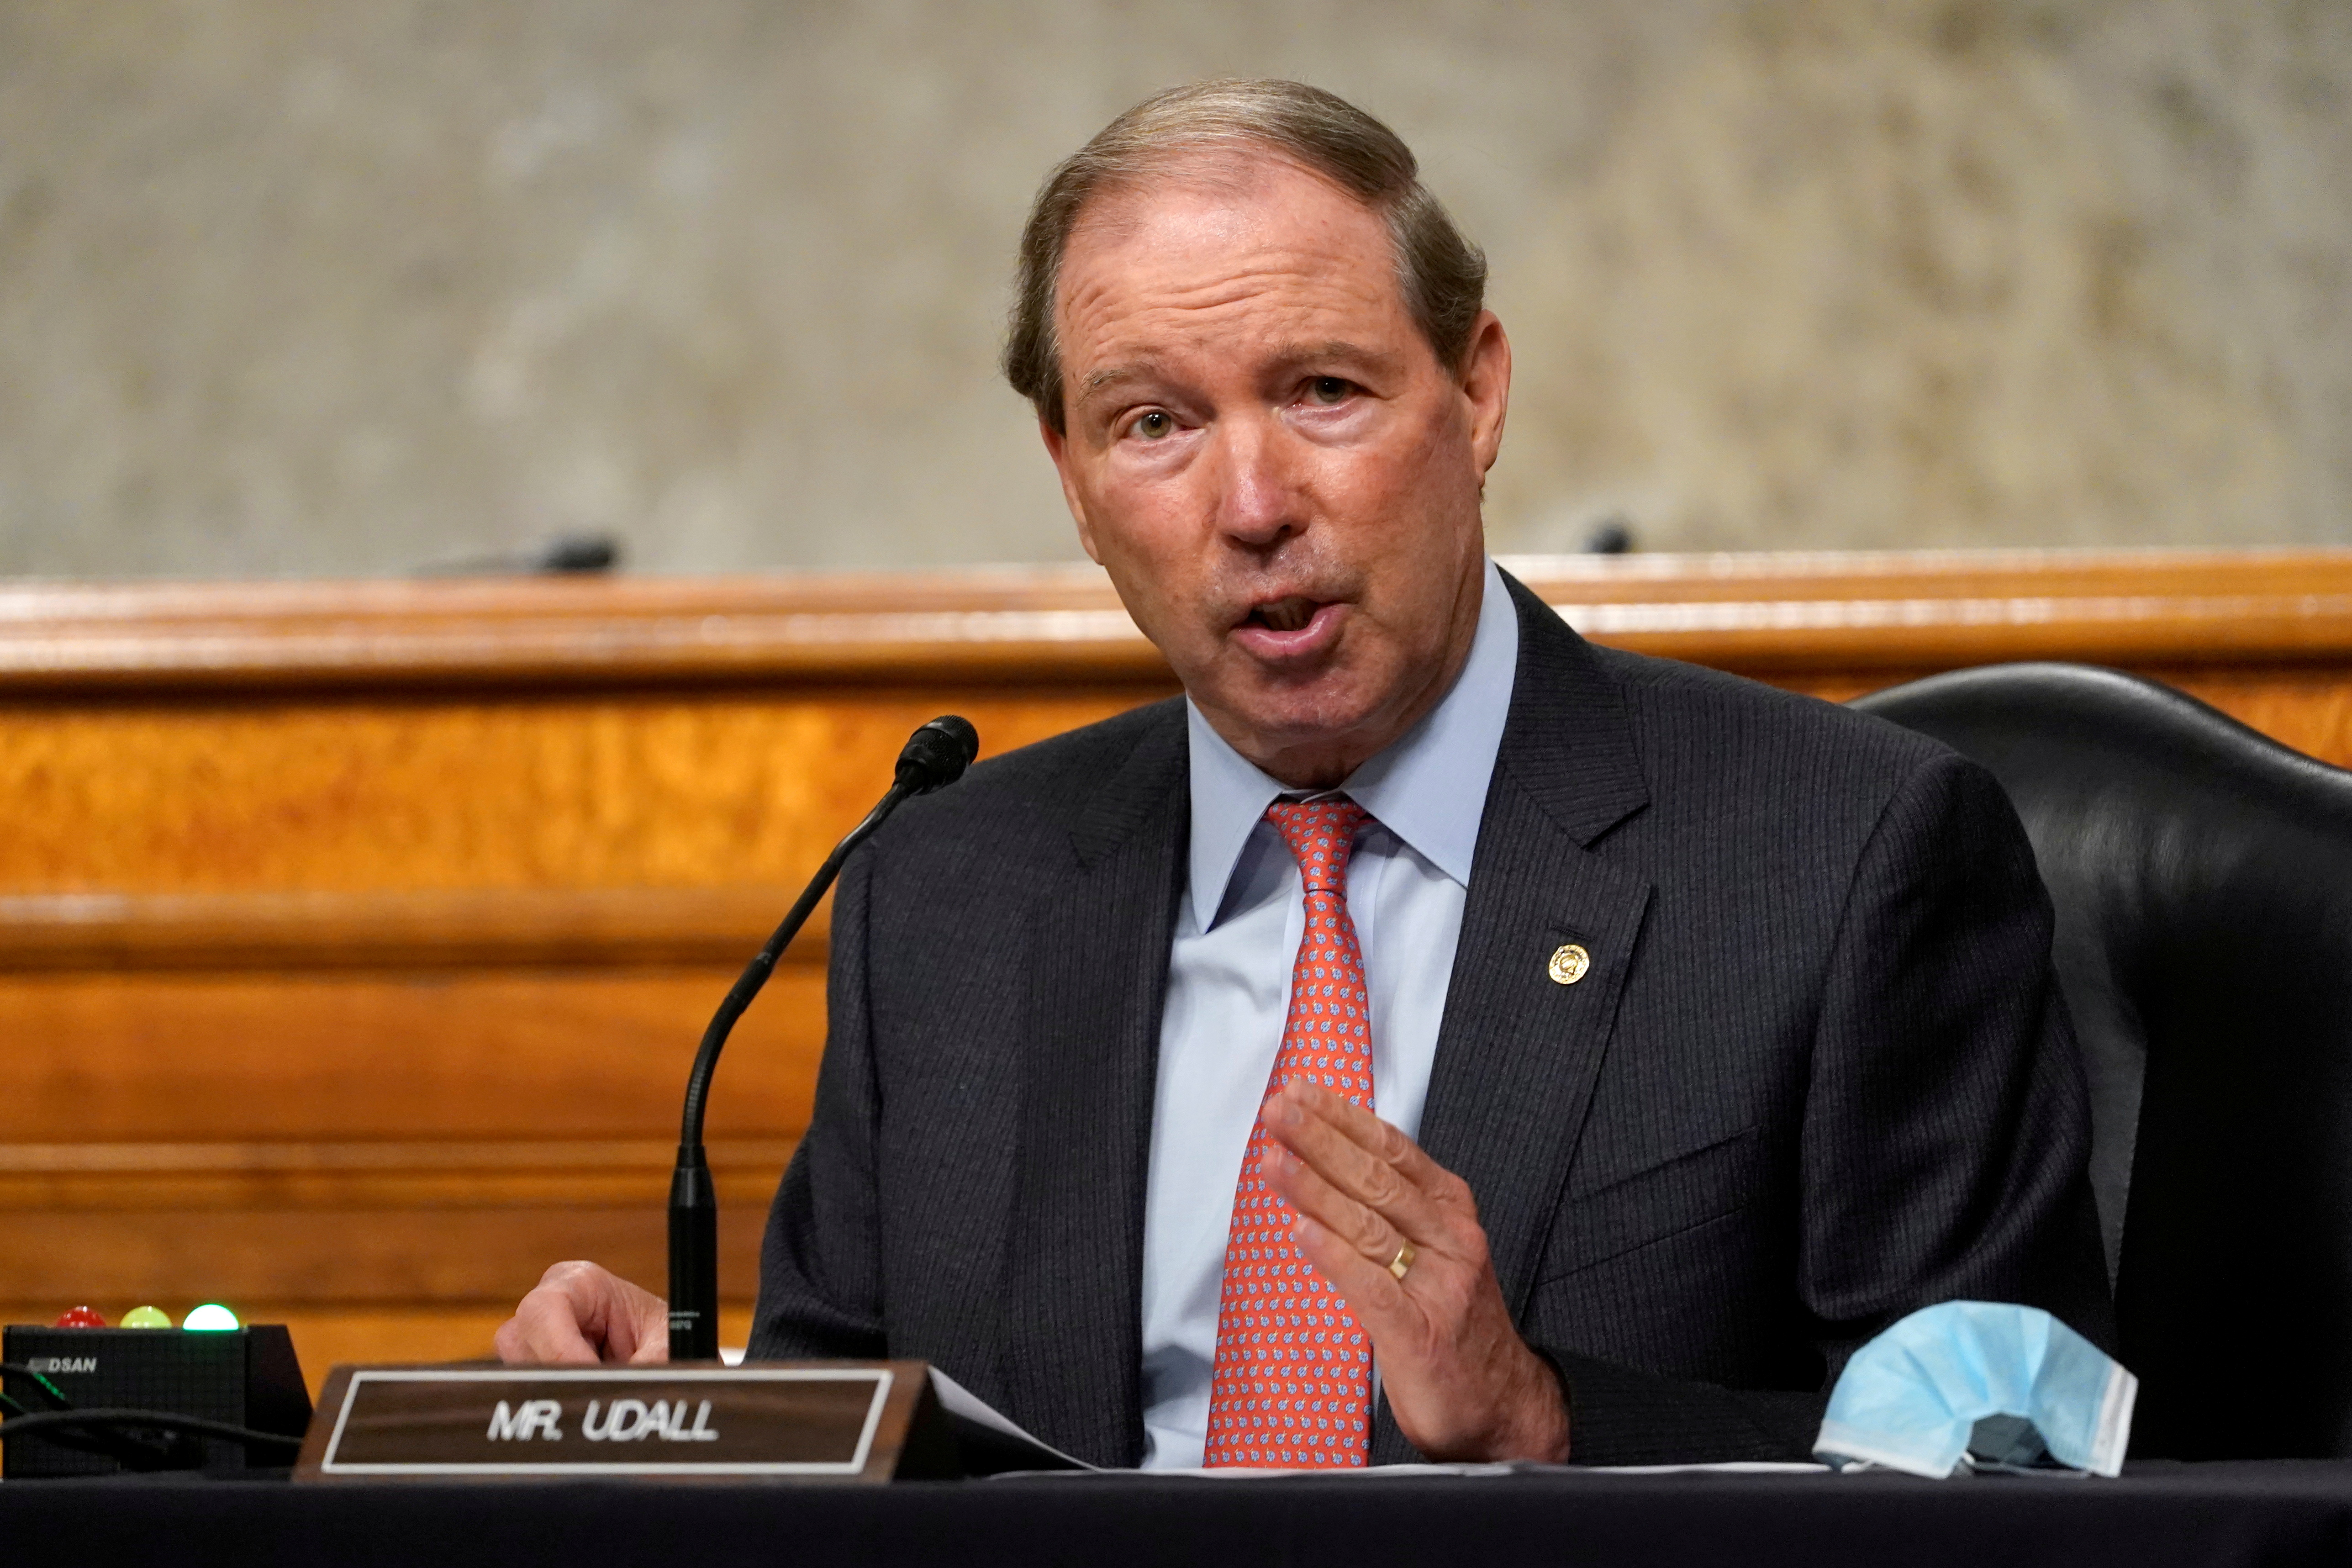 Sen. Tom Udall, D-N.M., speaks during a Senate Foreign Relations Committee hearing on U.S. Policy in the Middle East, on Capitol Hill in Washington, DC, U.S., September 24, 2020. Susan Walsh/Pool via REUTERS/File Photo